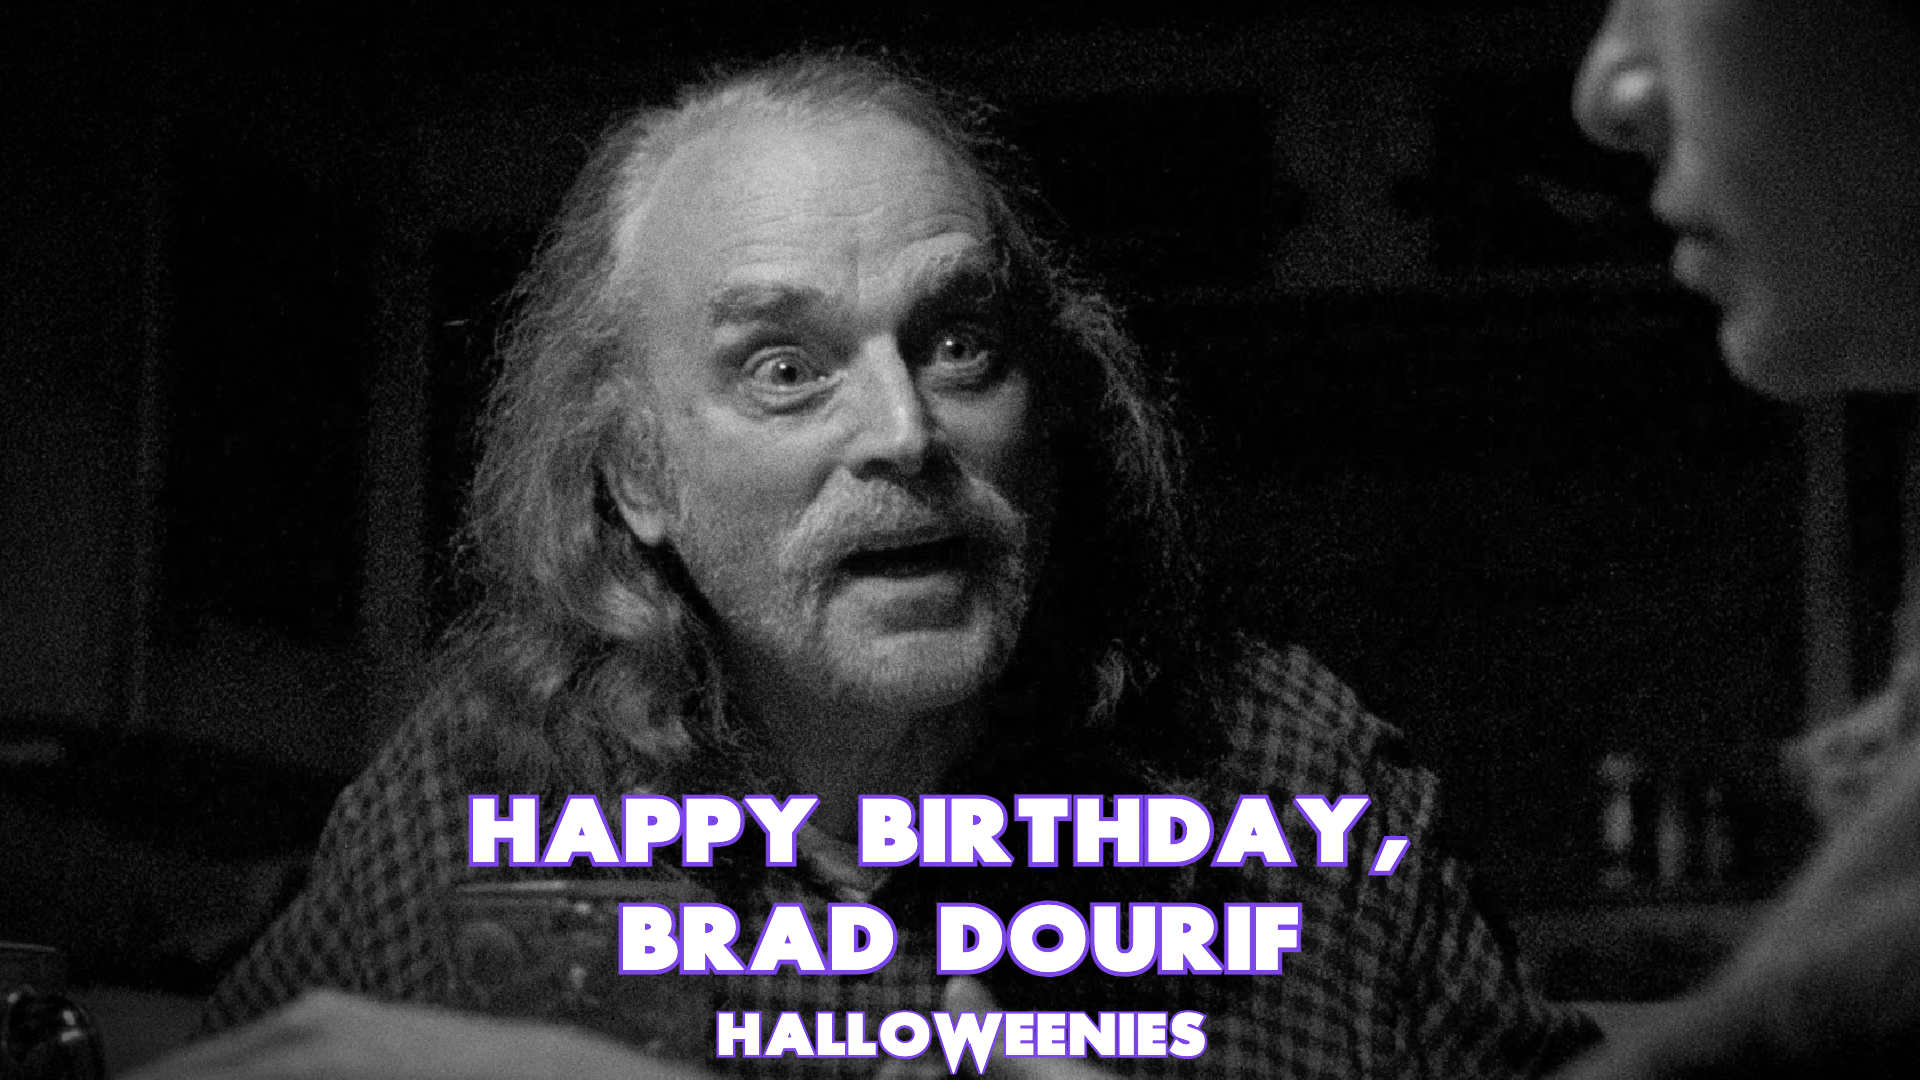 As Chucky might say, \"Park your piece of shit and wish Brad Dourif a Happy Birthday, already!\" 